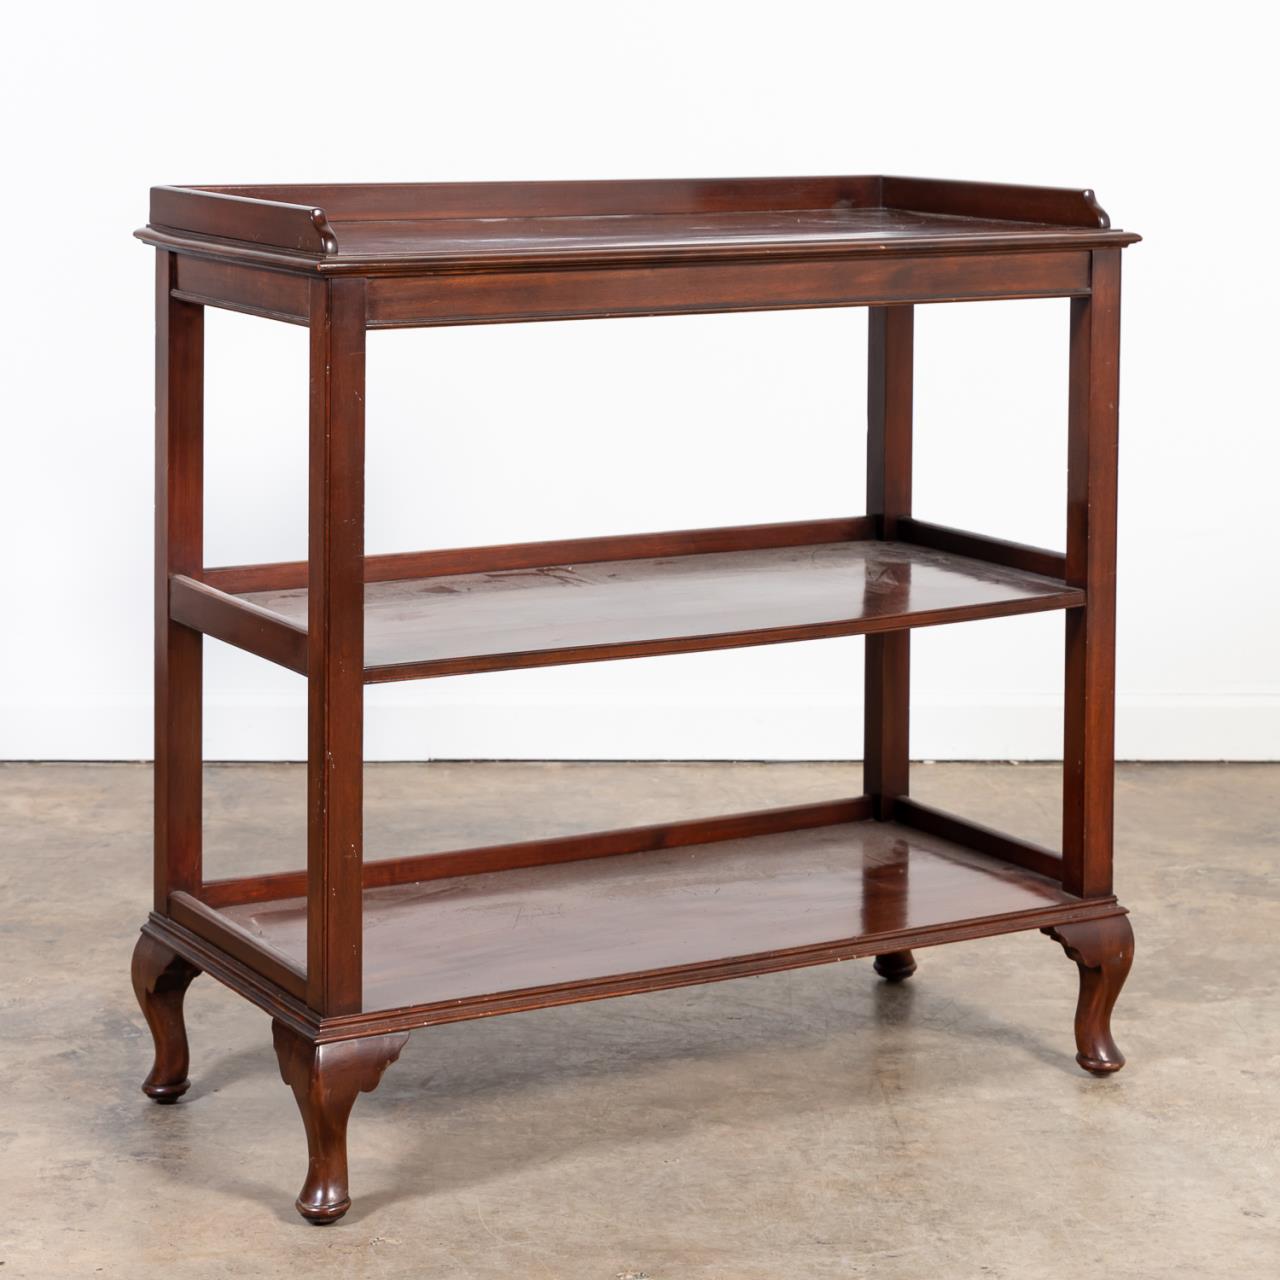 QUEEN ANNE STYLE MAHOGANY THREE TIER 35966b